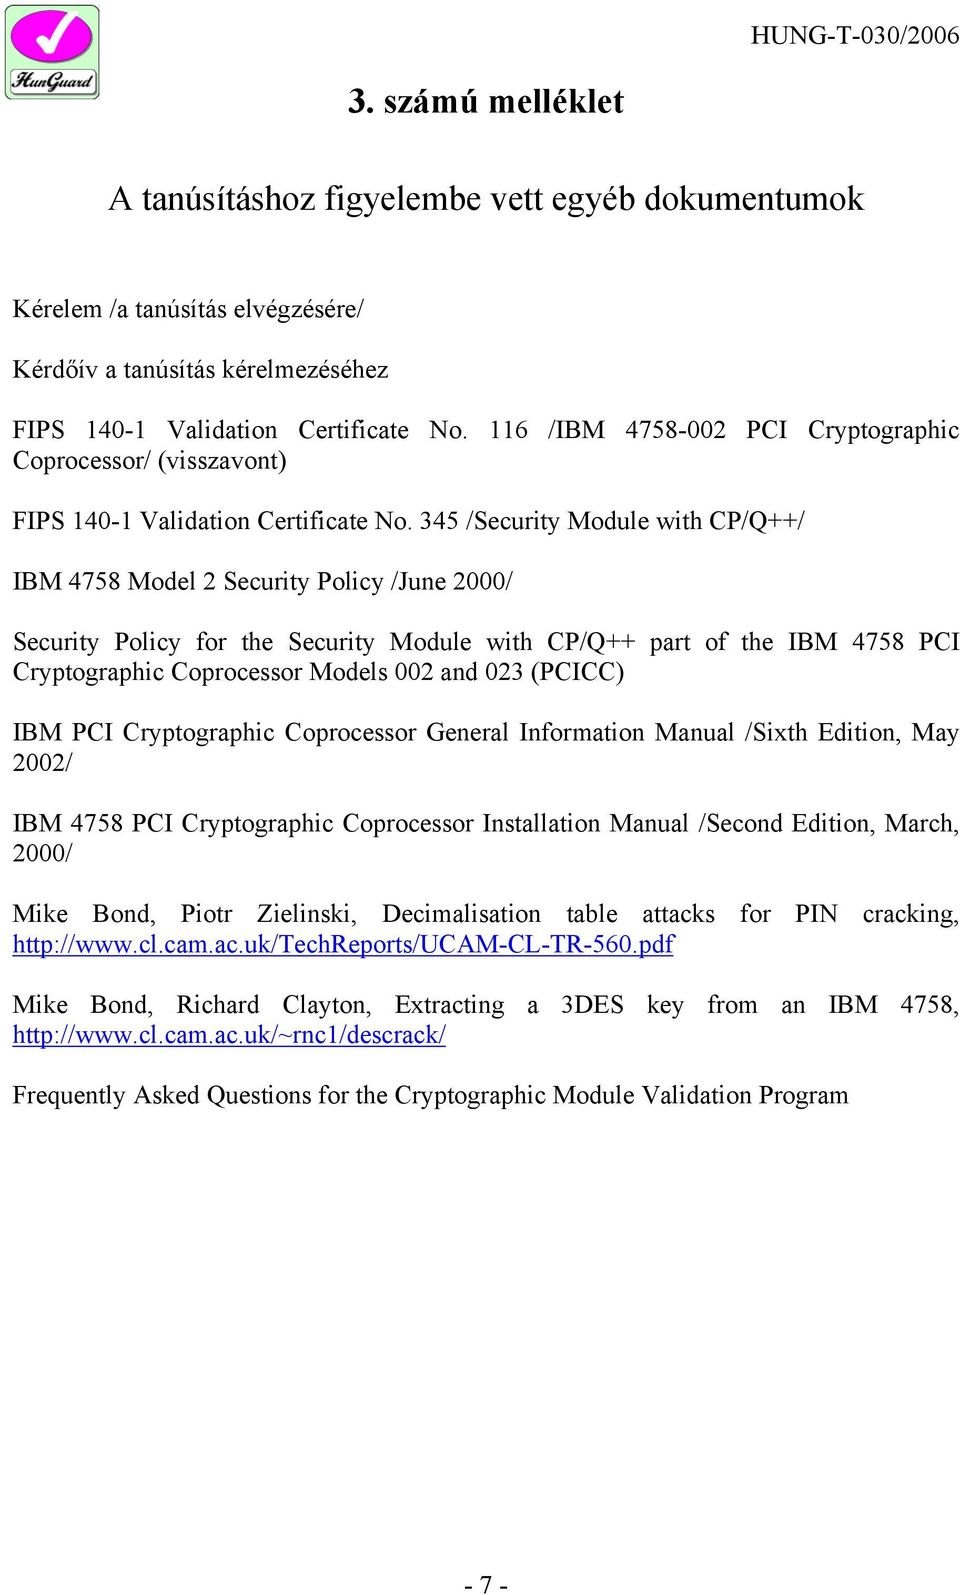 345 /Security Module with CP/Q++/ IBM 4758 Model 2 Security Policy /June 2000/ Security Policy for the Security Module with CP/Q++ part of the IBM 4758 PCI Cryptographic Coprocessor Models 002 and